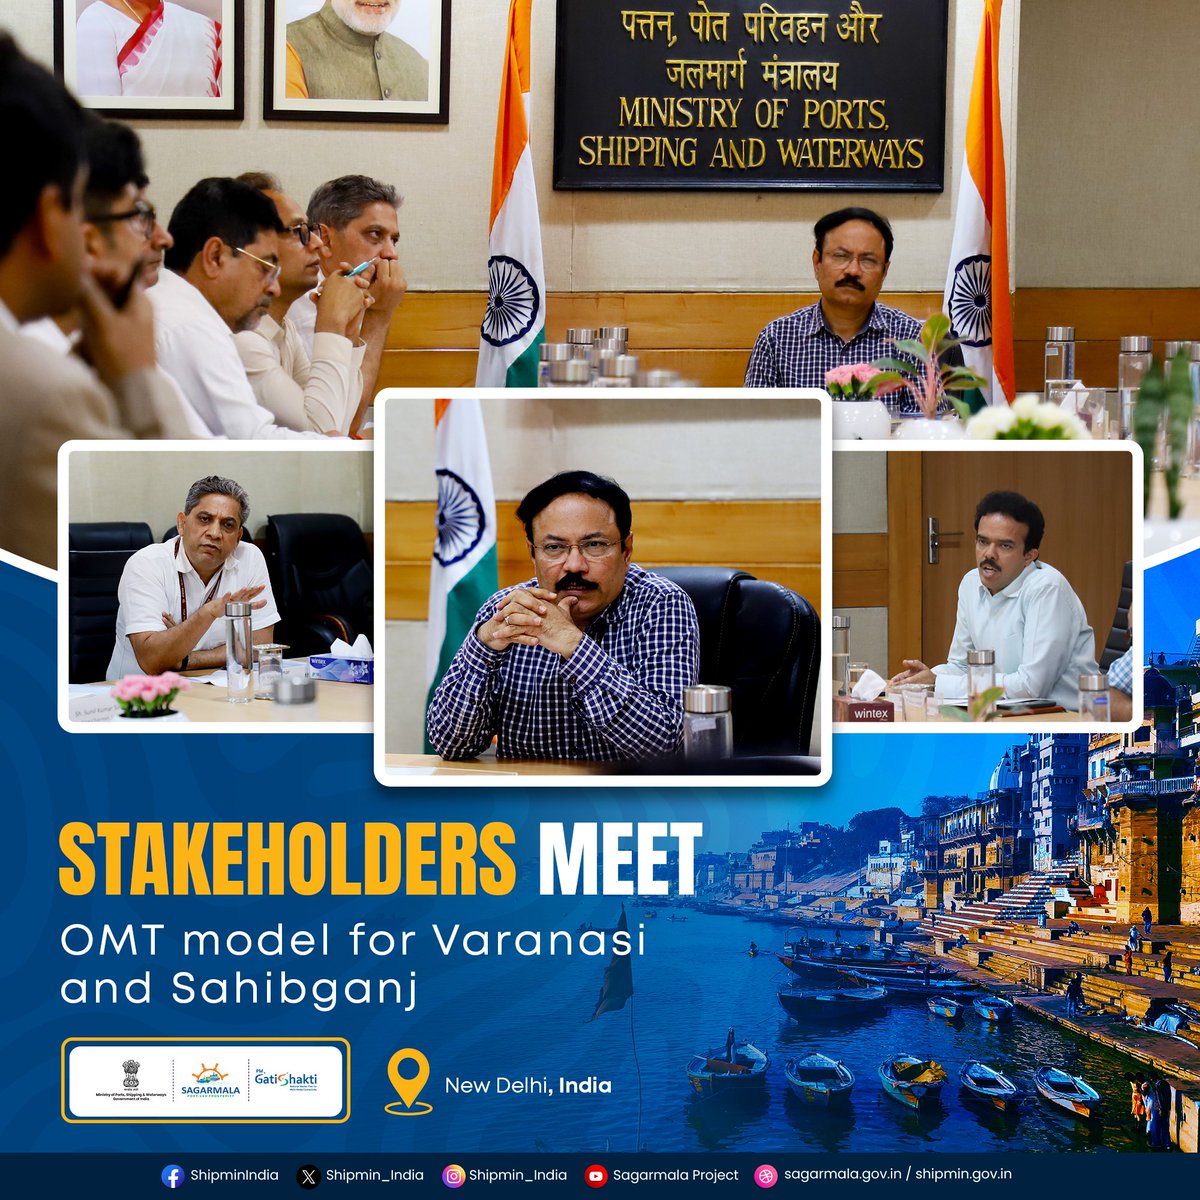 Shri T.K. Ramachandran, IAS, Secretary, MoPSW chaired a stakeholders meet on OMT model for Varanasi & Sahibganj Terminals. MoPSW in association with @IWAI_ShipMin working actively to enhance collaboration with the private sector to enrich India's water transport system @UPGovt